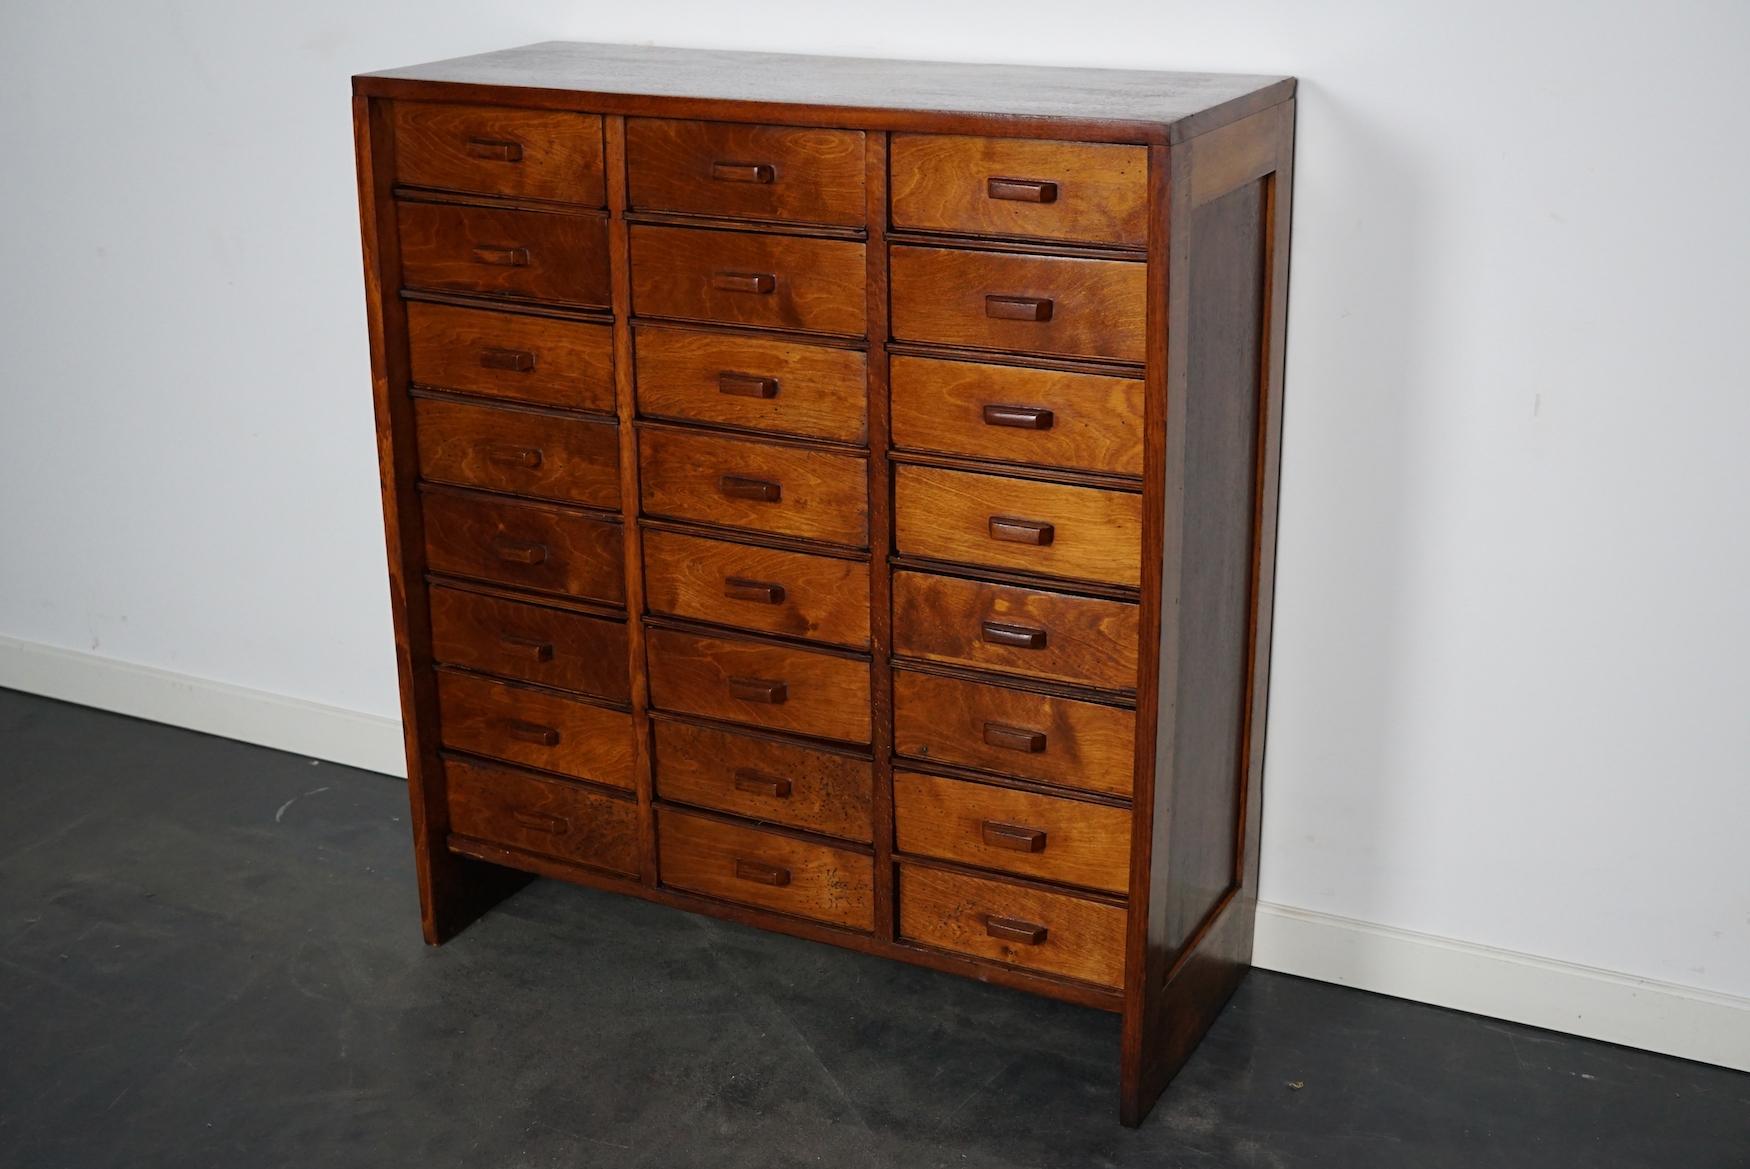 This apothecary cabinet was made circa 1950s in the Netherlands. The cabinet was used on a school to store painting supplies. It features 24 drawers with wooden handles. The interior dimensions of the drawers are: D W H 28 x 22 x 7.5 cm. It shows